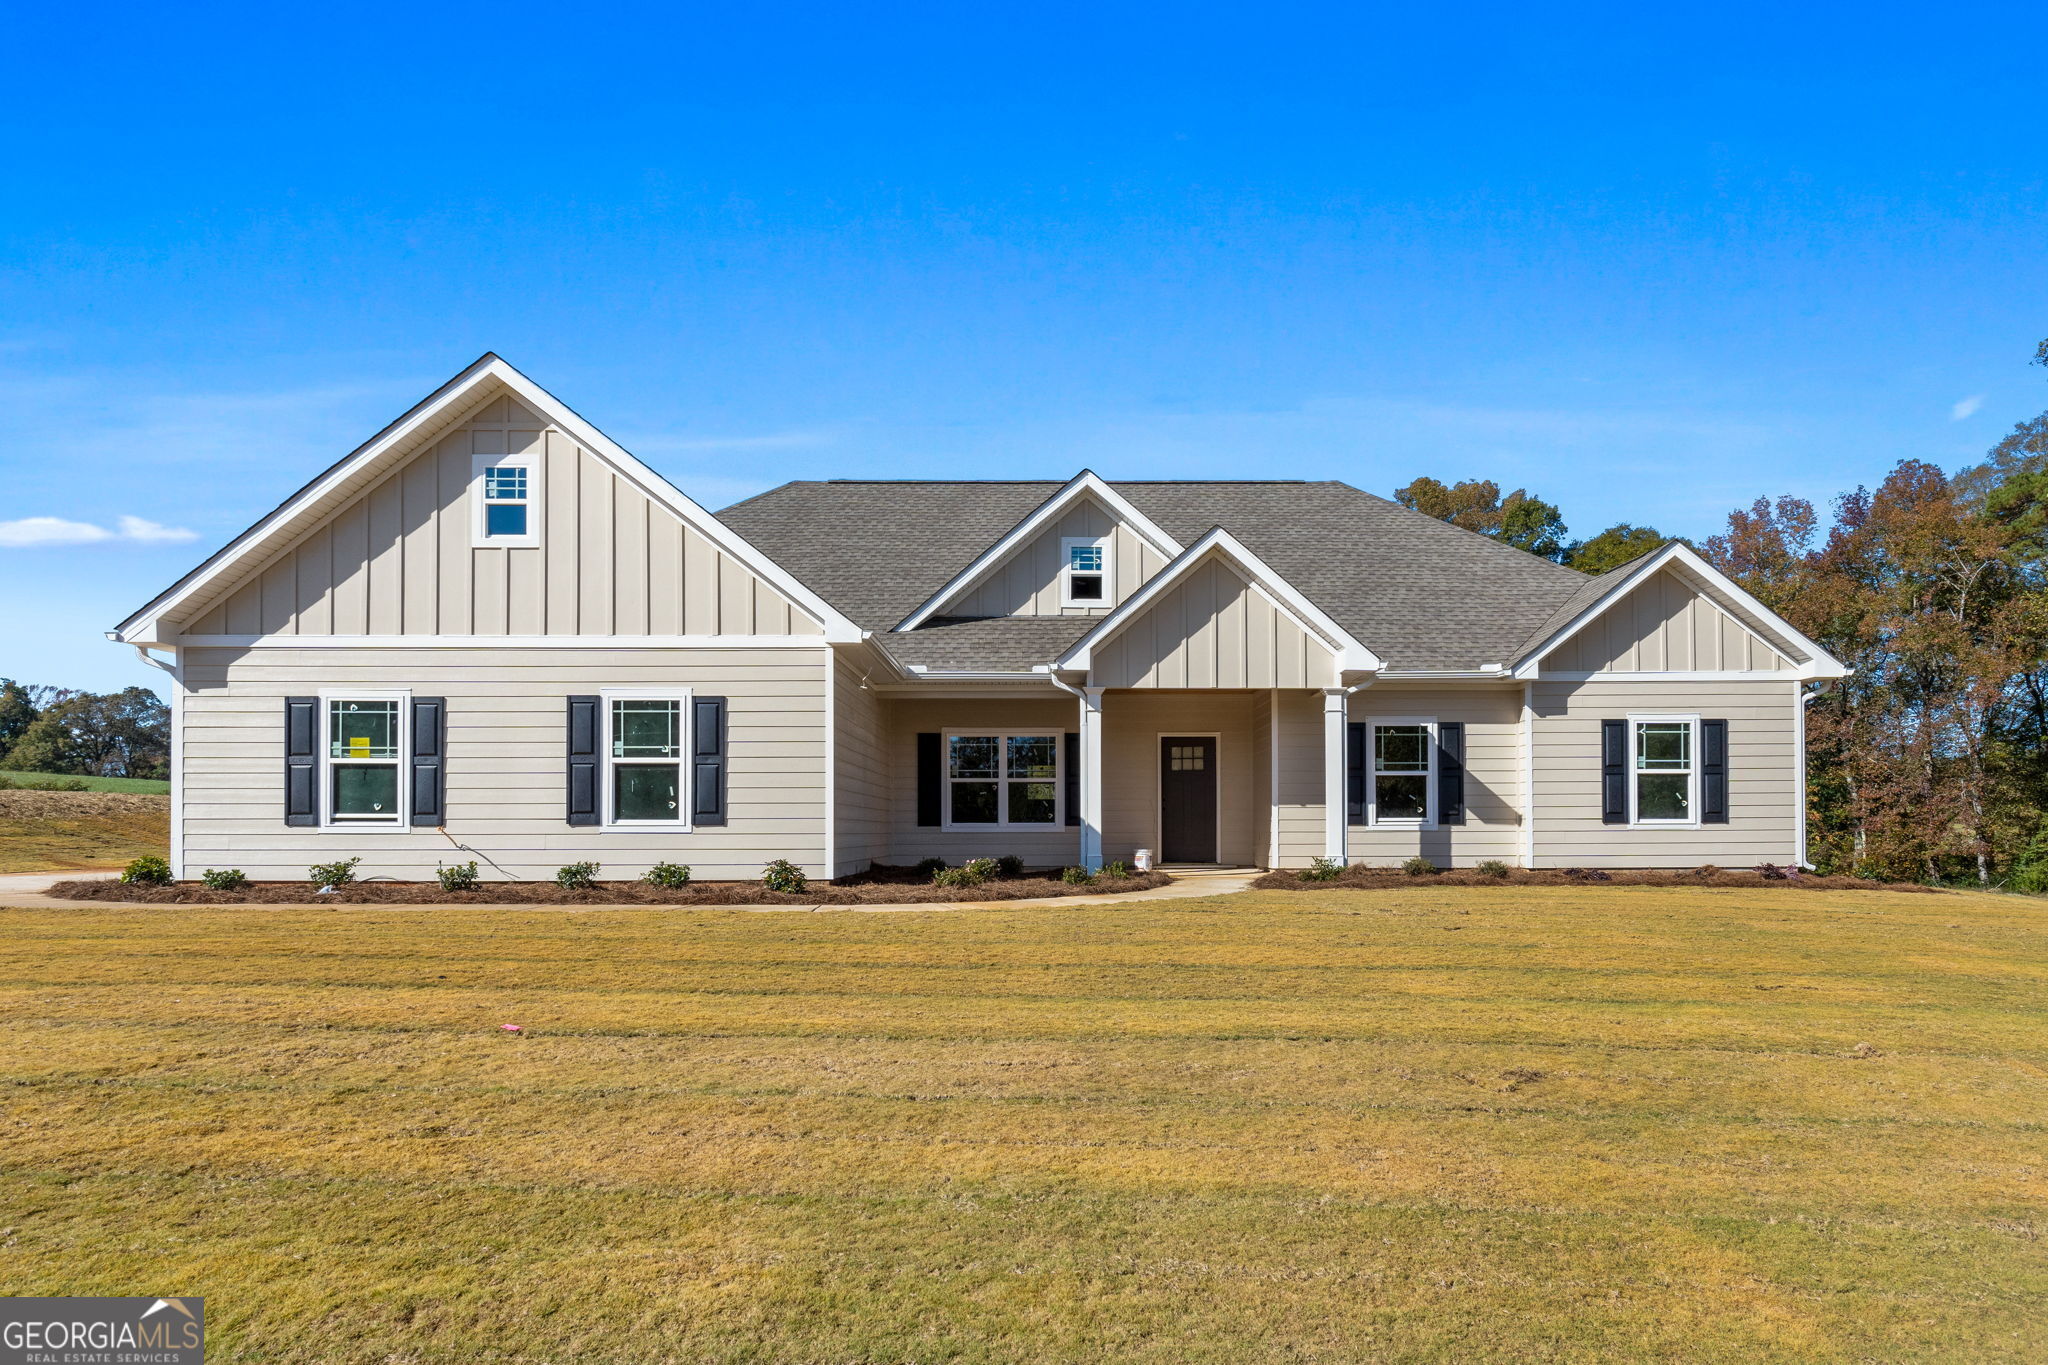 396 Adams Drive Meansville, GA 30256 – Pike County New Construction